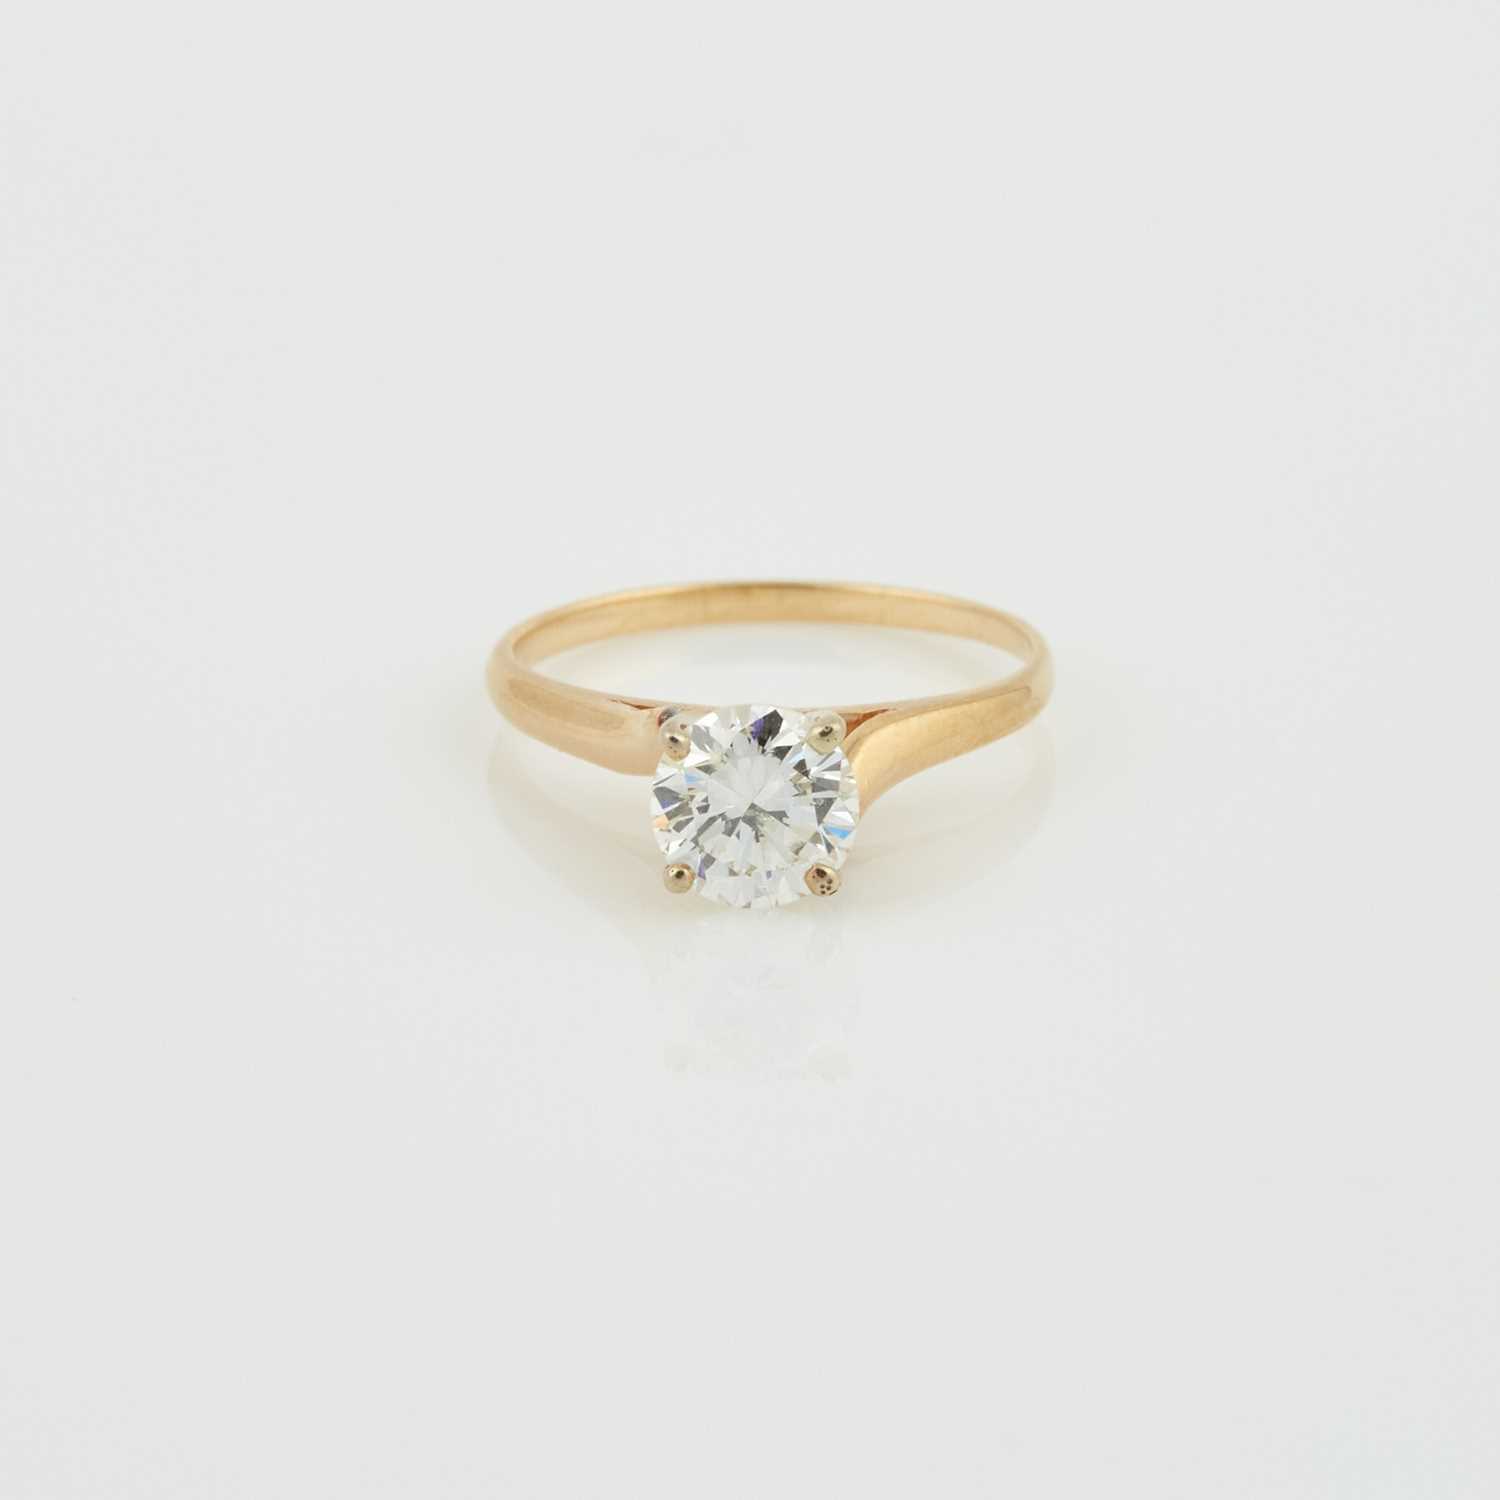 Lot 82 - Diamond Solitaire Ring about 0.90 ct., 14K 1 dwt.